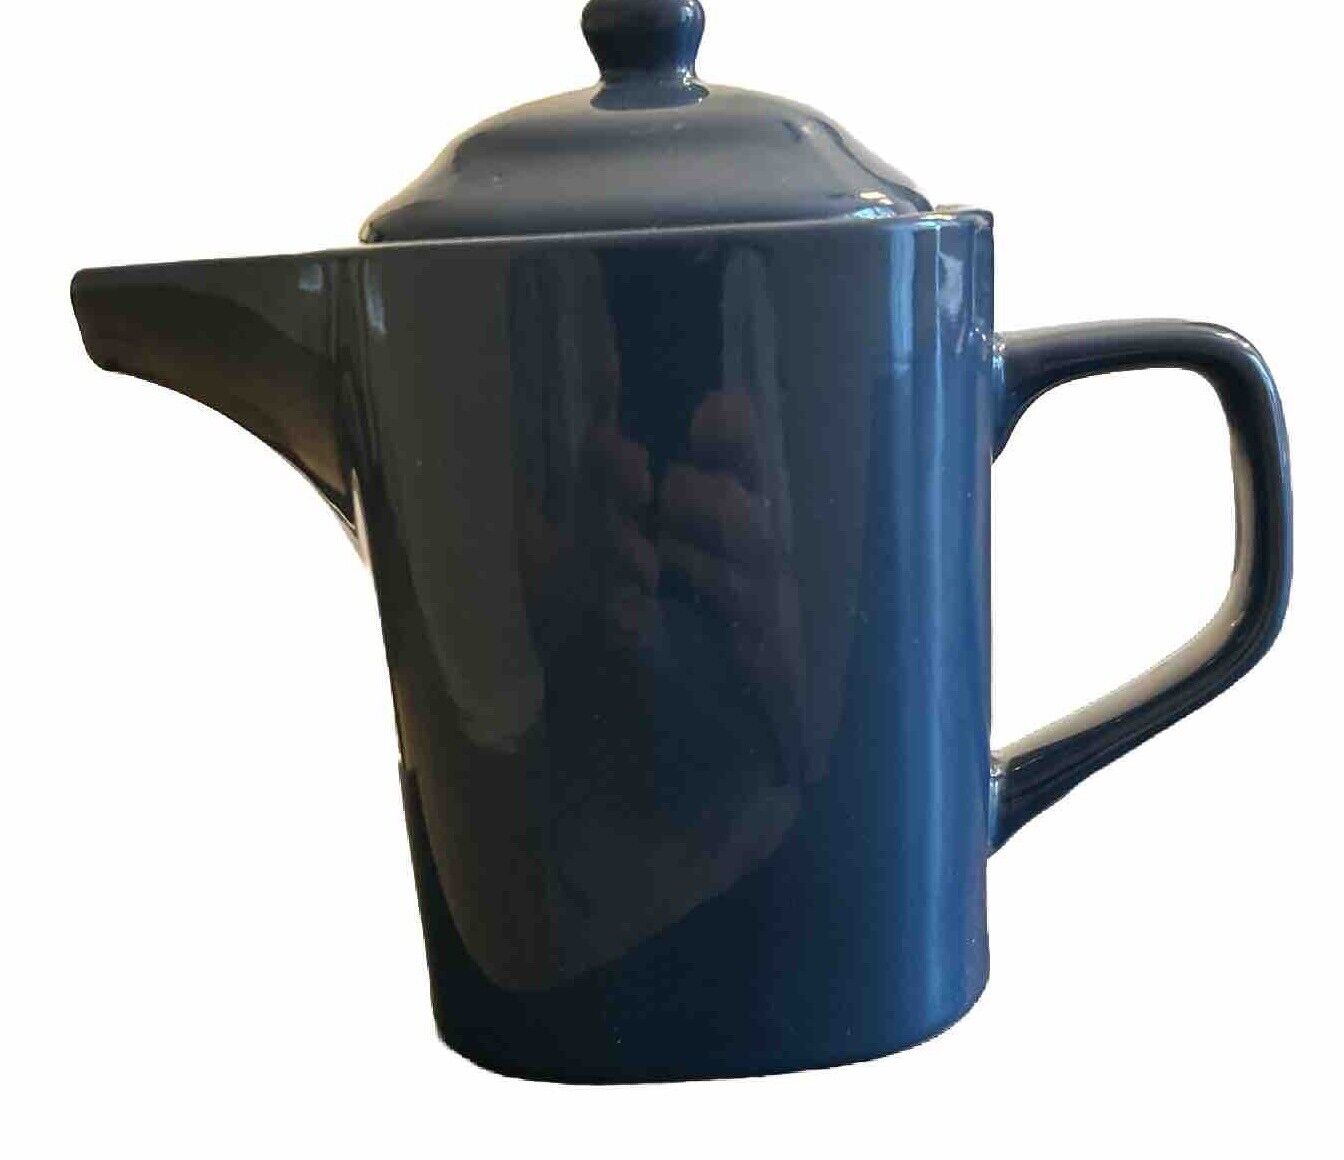 California pantry rounded square teapot deep blue